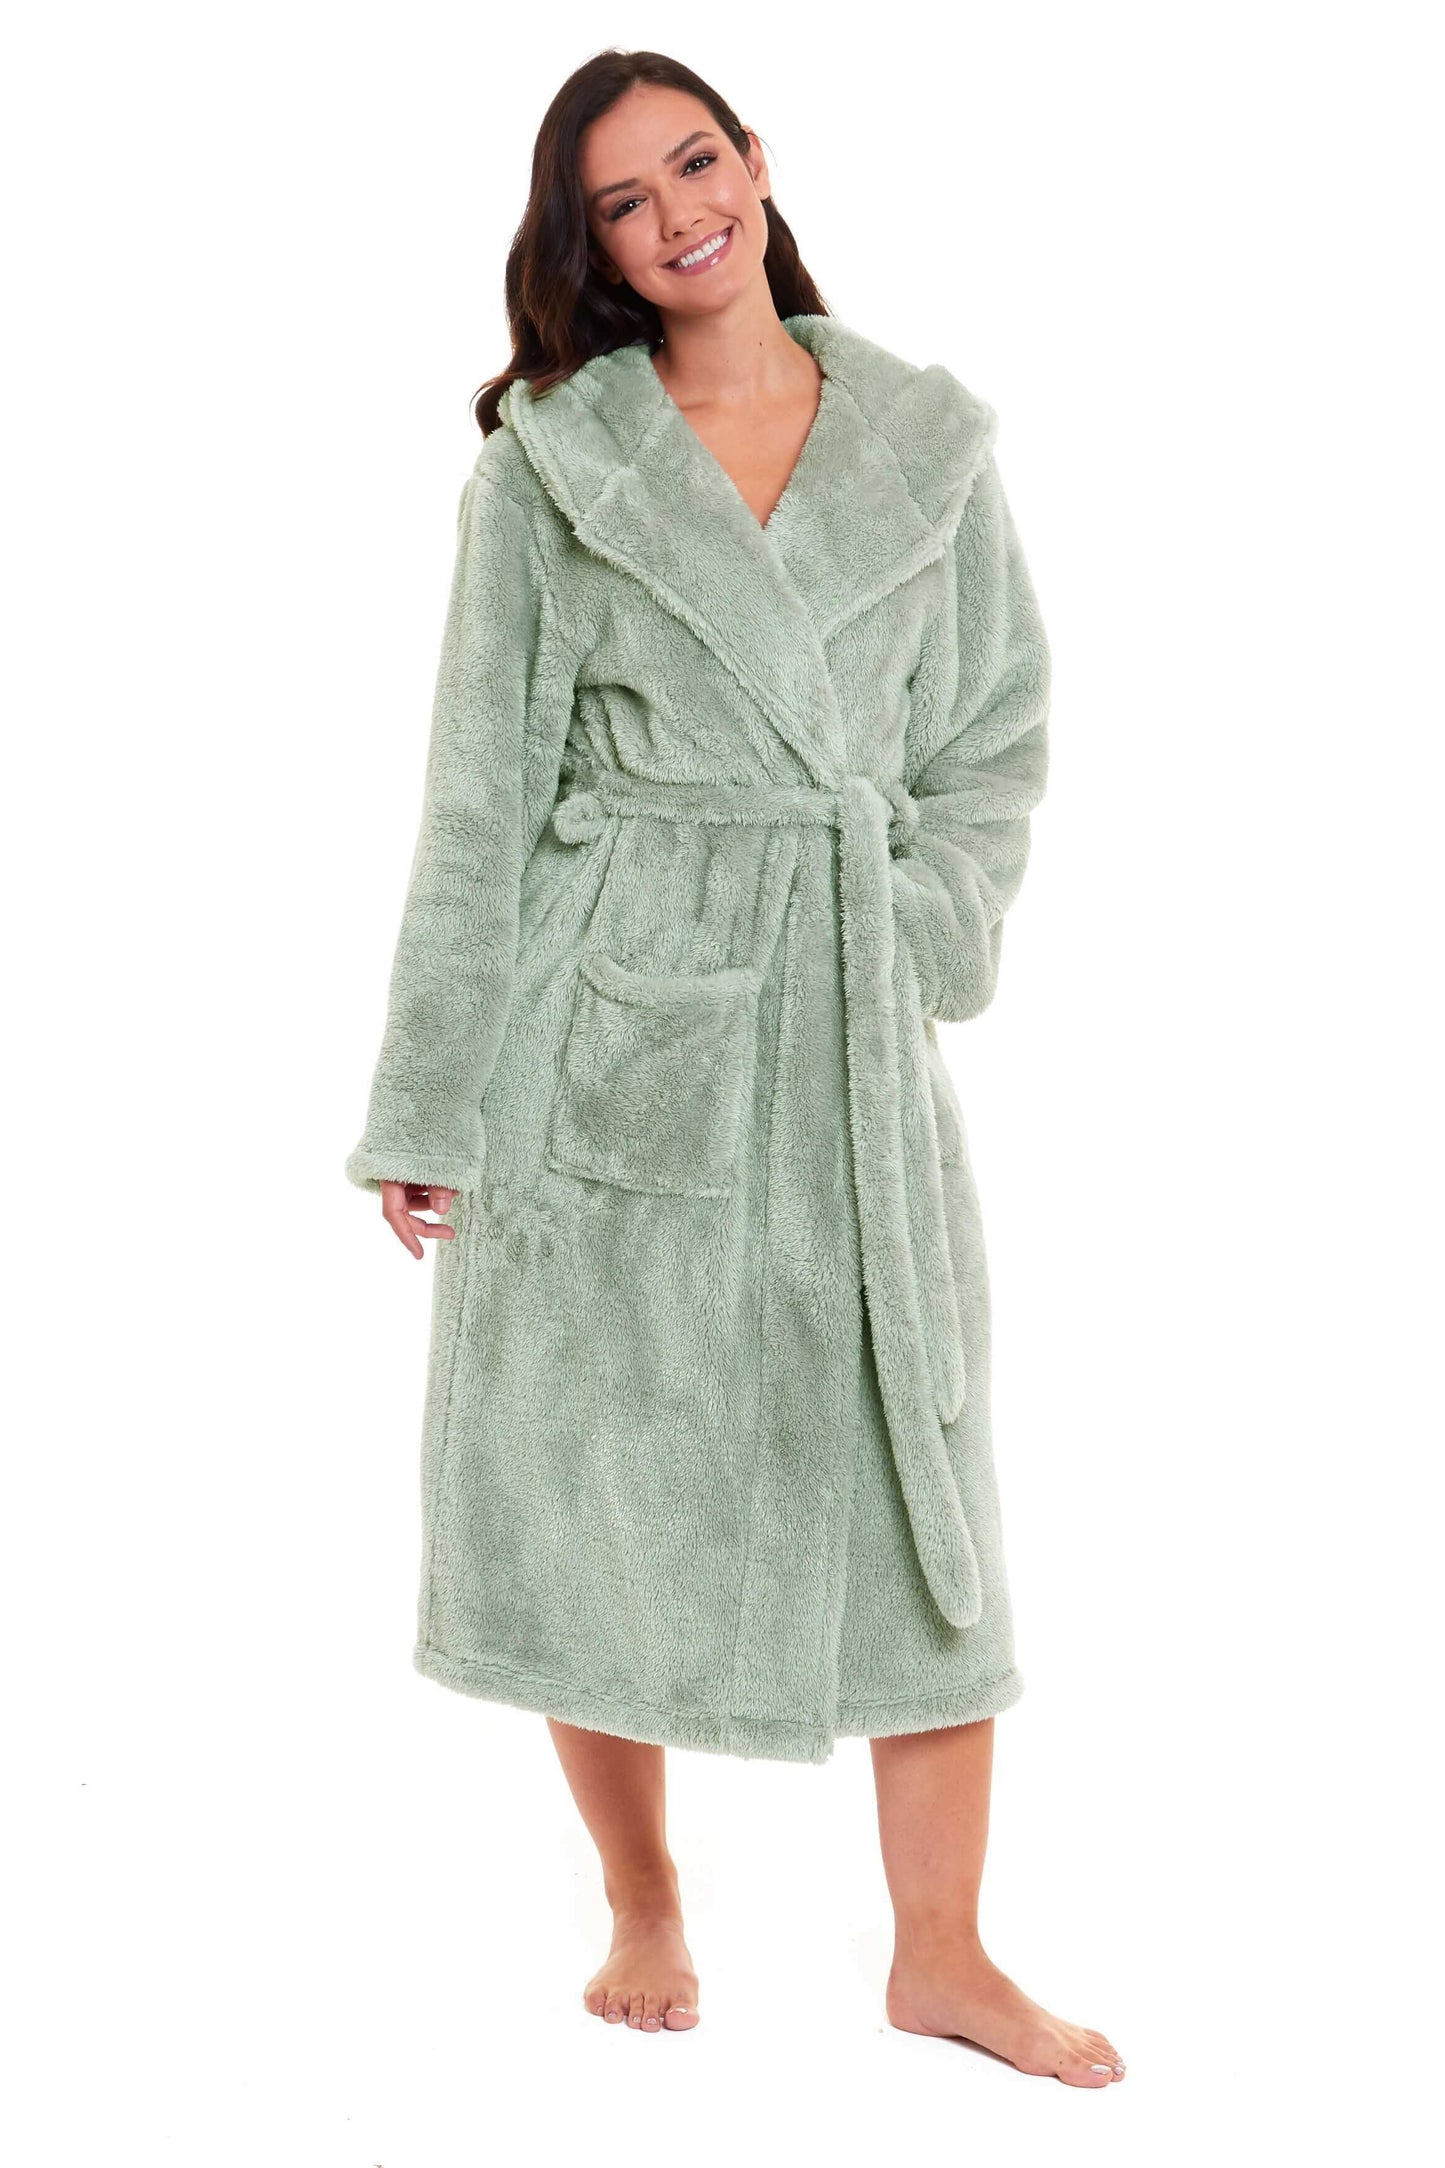 Women's Sage Green Fleece Dressing Gown, Ladies Robes. Buy now for £20.00. A Robe by Daisy Dreamer. bathrobe, daisy dreamer, dressing, dressing gown, fleece, green, hooded robe, ladies, large, long sleeve, loungewear, medium, natural, nightwear, plush fle